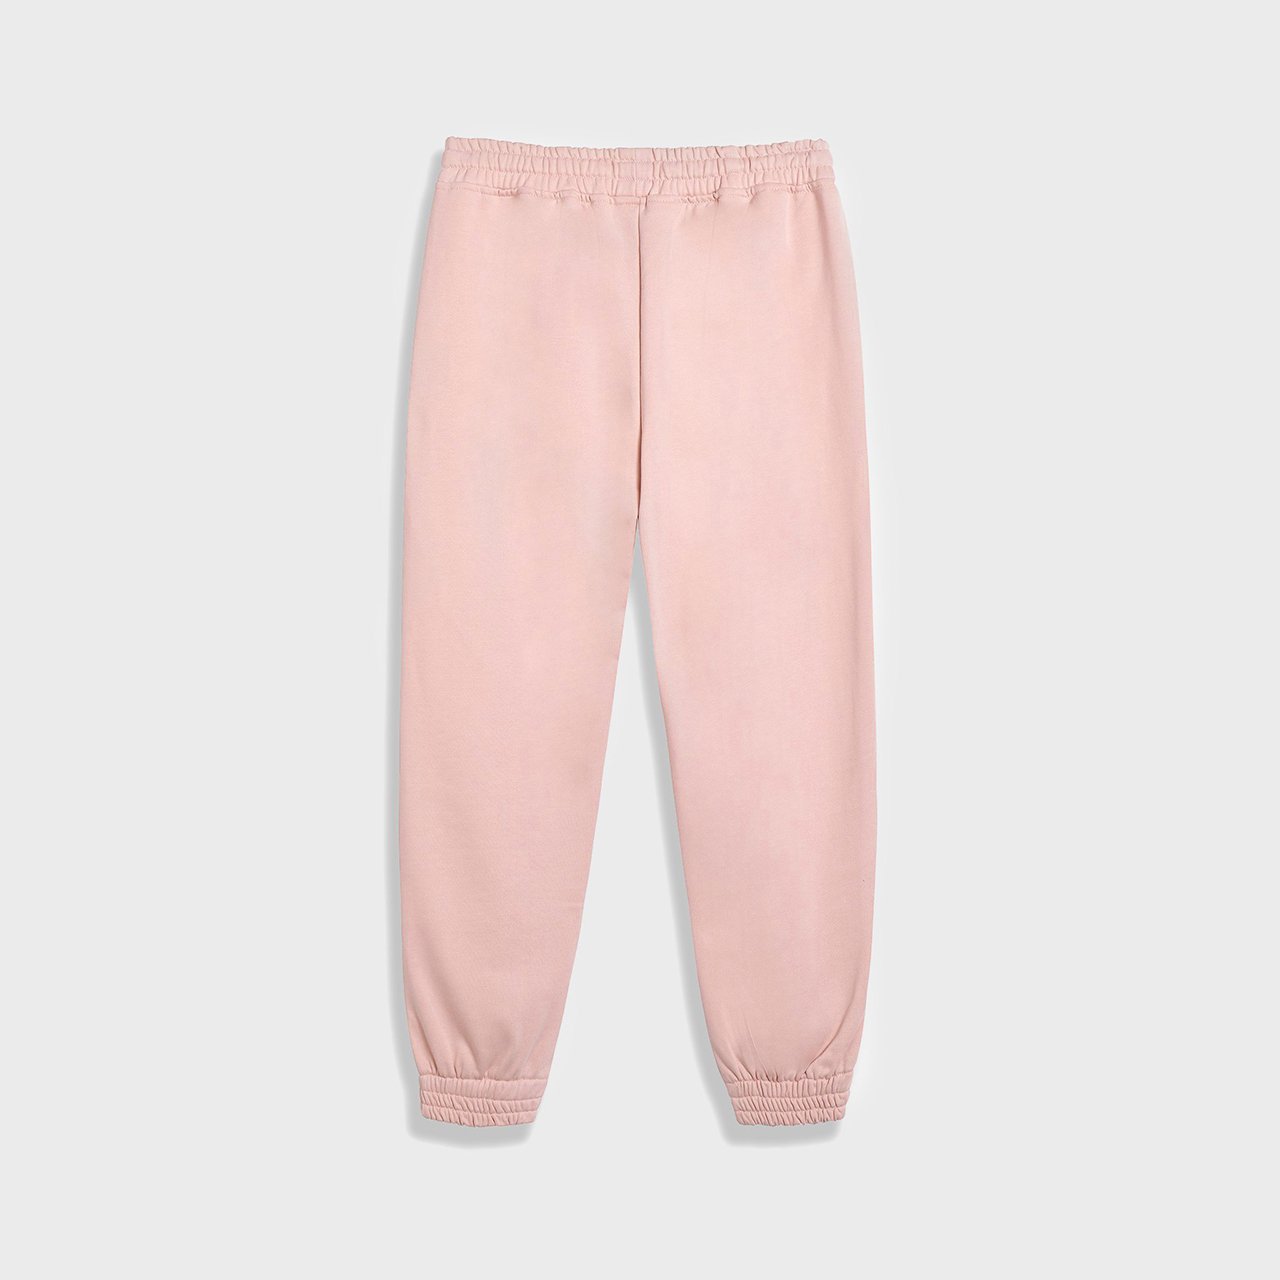 Quần jogger unisex SWALLA PAPERCLIP SWEATPANT - FrenchTerry Fabric CAO CẤP - Màu SALMON - LOCALBRAND